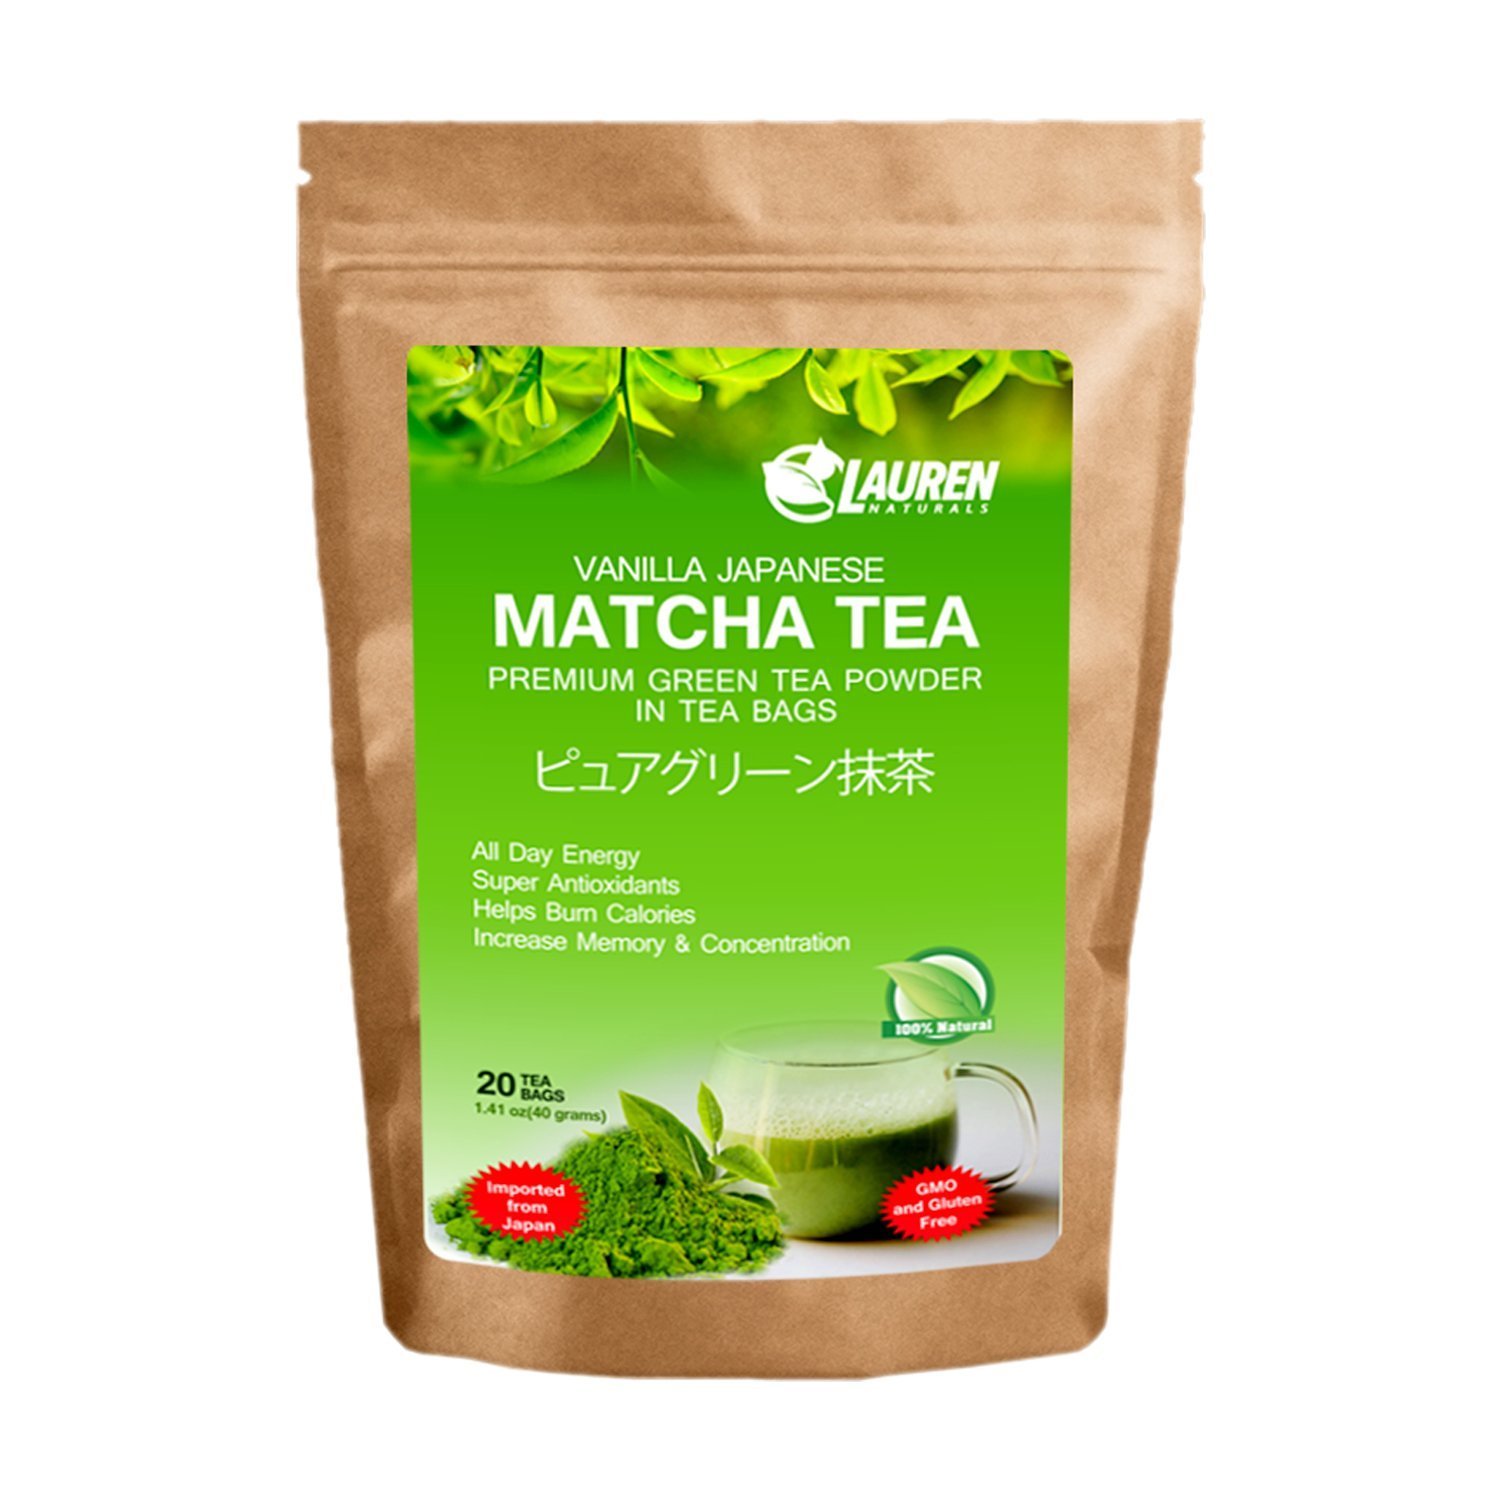 Vanilla Flavored Matcha Powder TEA BAGS: Imported Japanese Organic Matcha Powder in Tea Bags by Lauren Naturals: Great for - Risk Free Full Money Back Guarantee